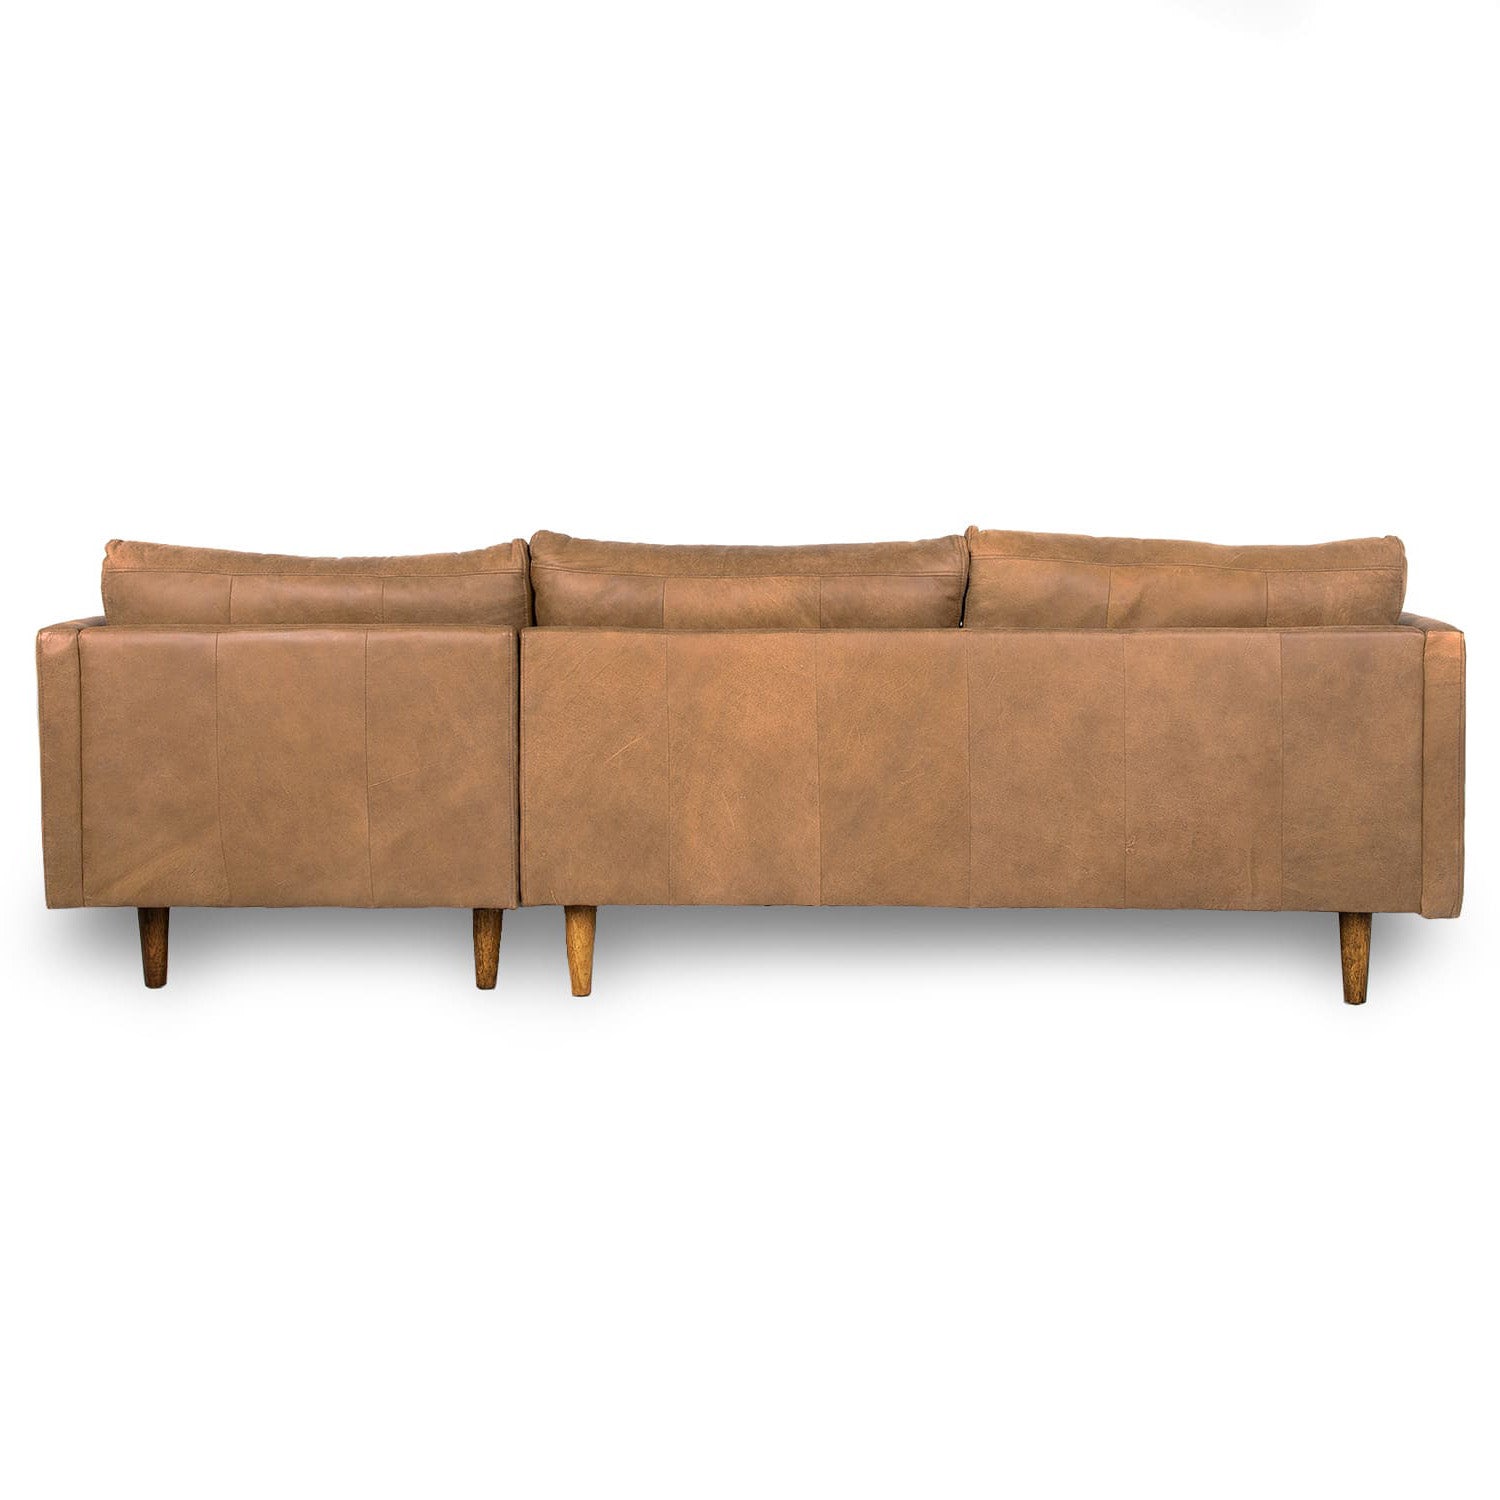 Jordie Leather Right Side Facing Chaise Lounge